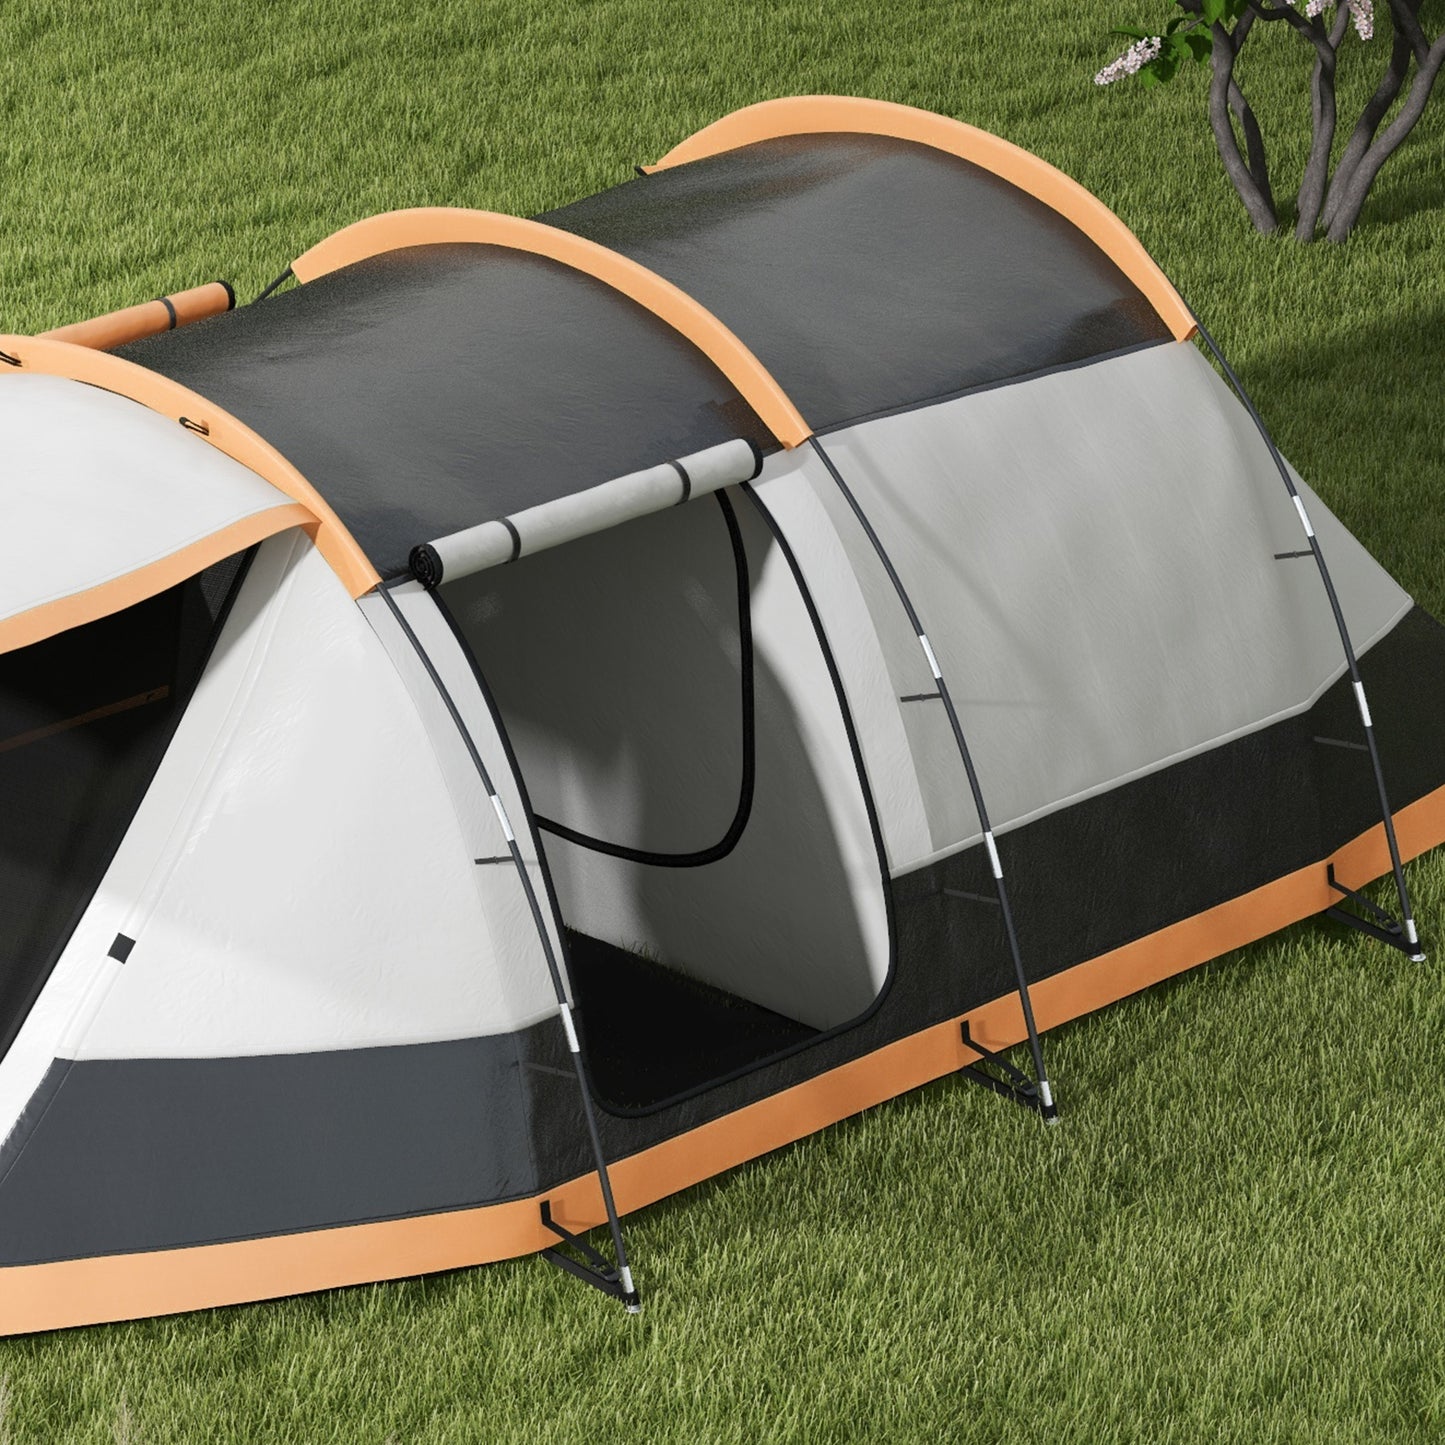 Outsunny 3-4 Man Camping Tent Family Tunnel Tent 2000mm Waterproof Portable with Bag Orange